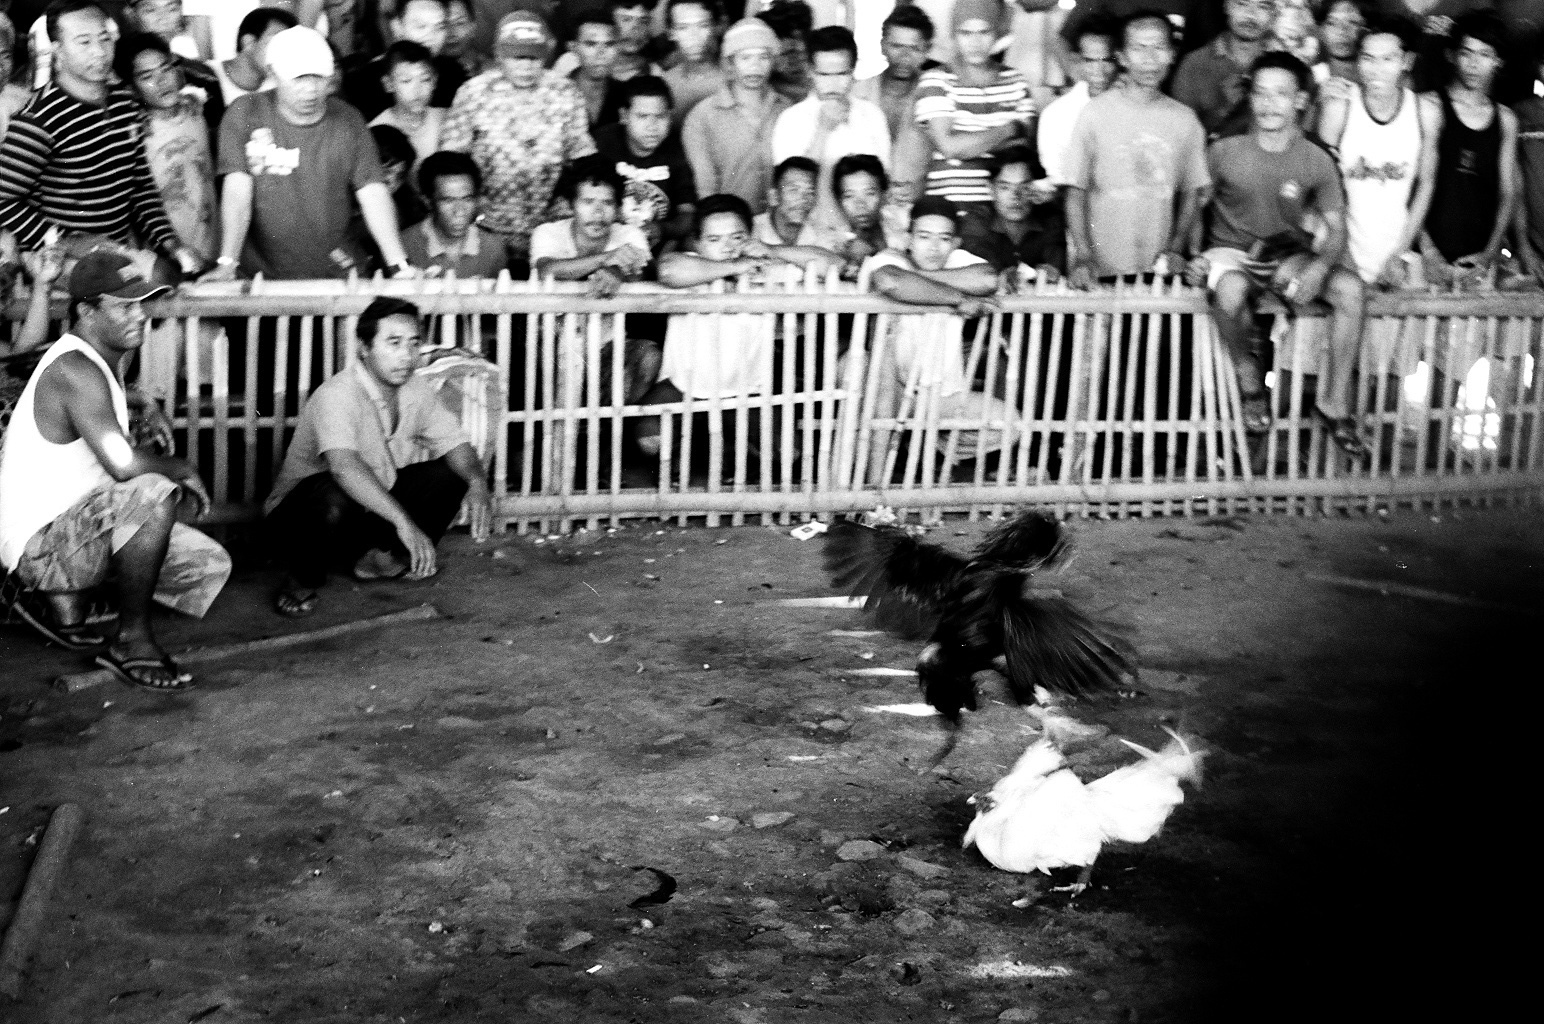  Amed, Bali, Indonesia. 2012.  One bird delivers a severe strike on it's opponent as the men watch. 